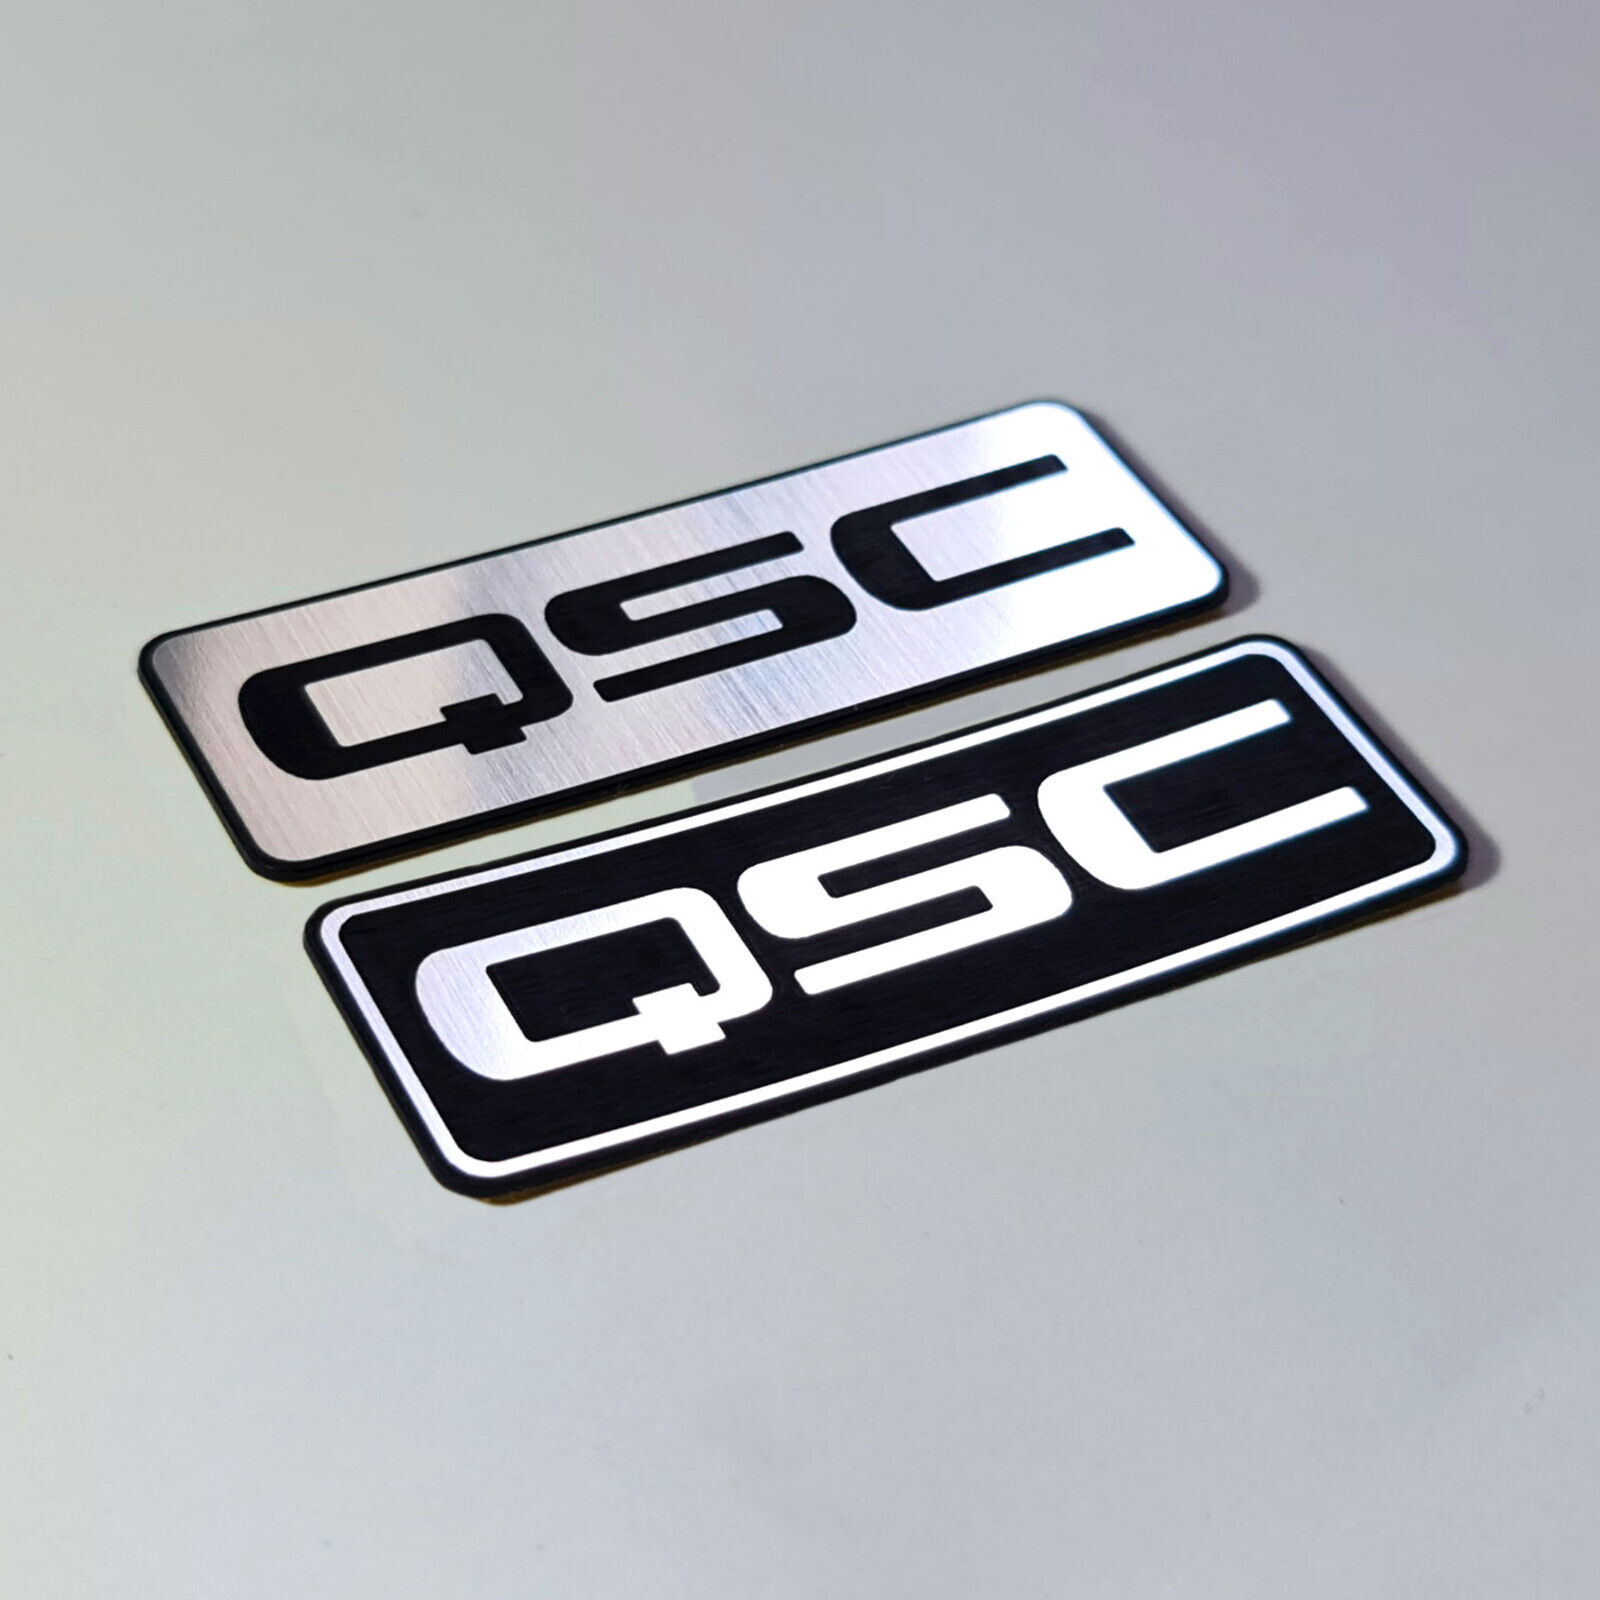 QSC - Sticker Case Badge Decal - Chrome Reflective - Set of Two Emblems